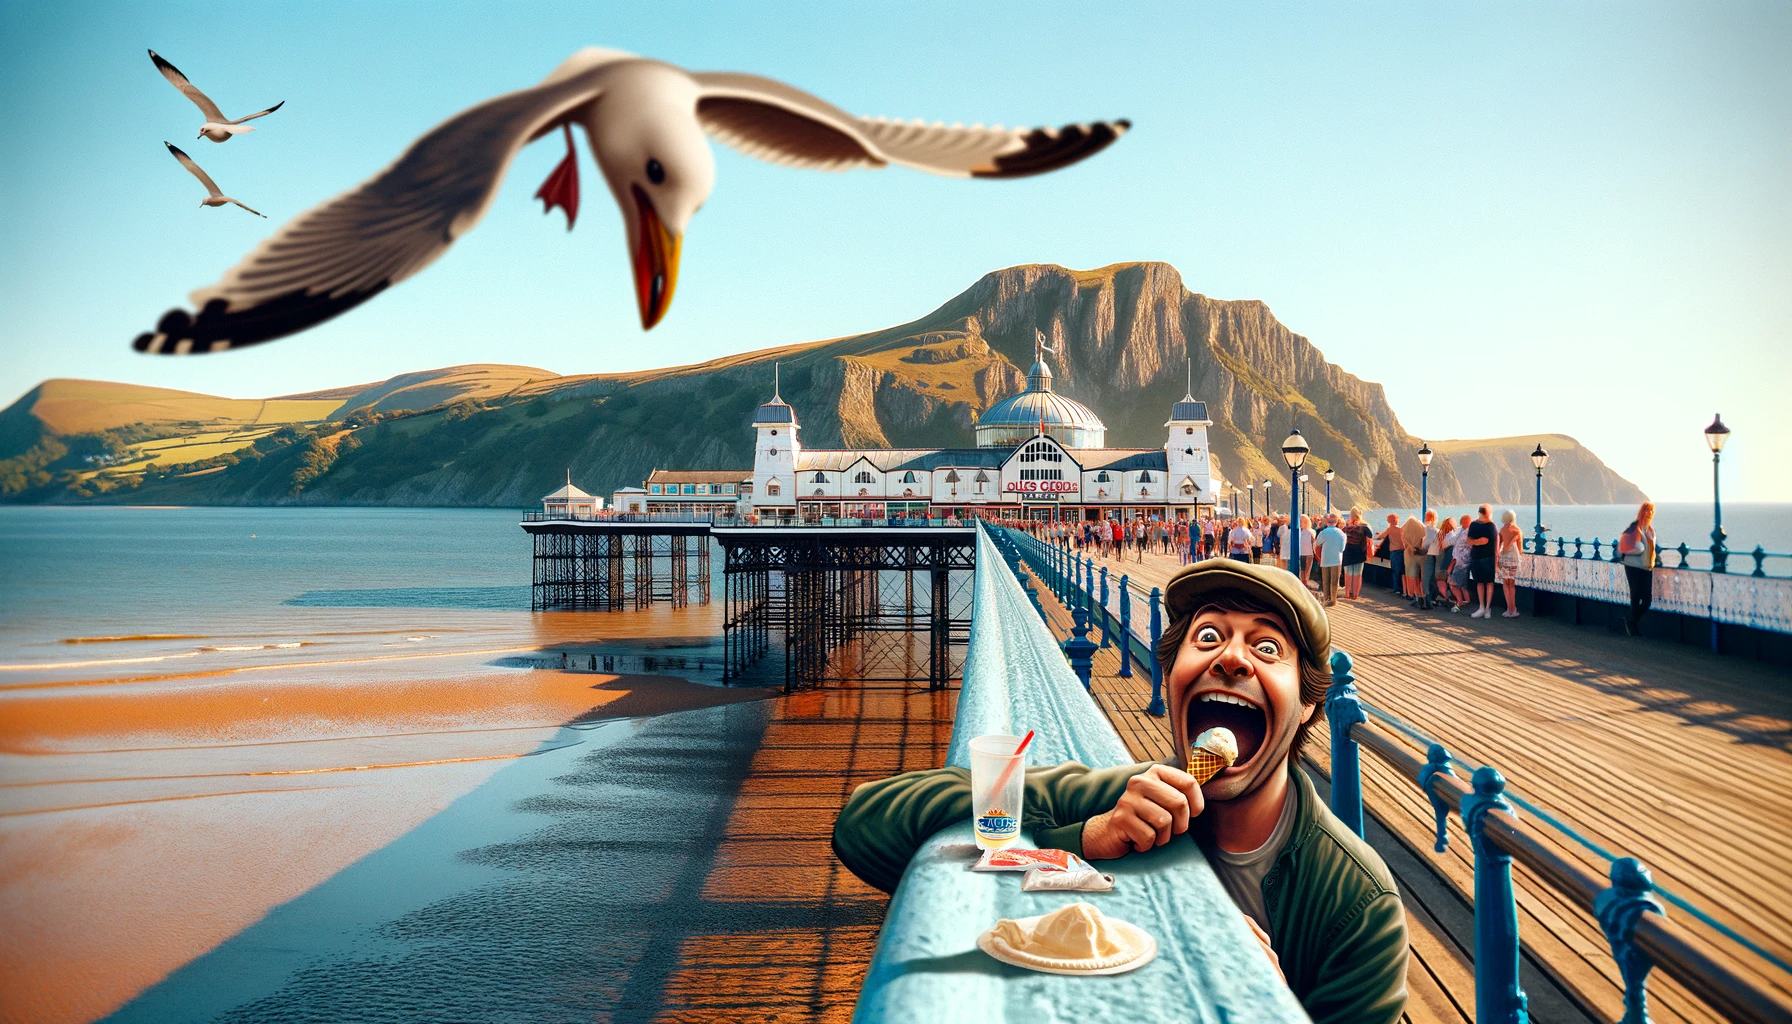 DALL·E 2024-01-08 19.06.14 - An image capturing Llandudno Pier in North Wales, with the famous Great Orme visible in the background. The composition focuses on the scenic pier ext.png